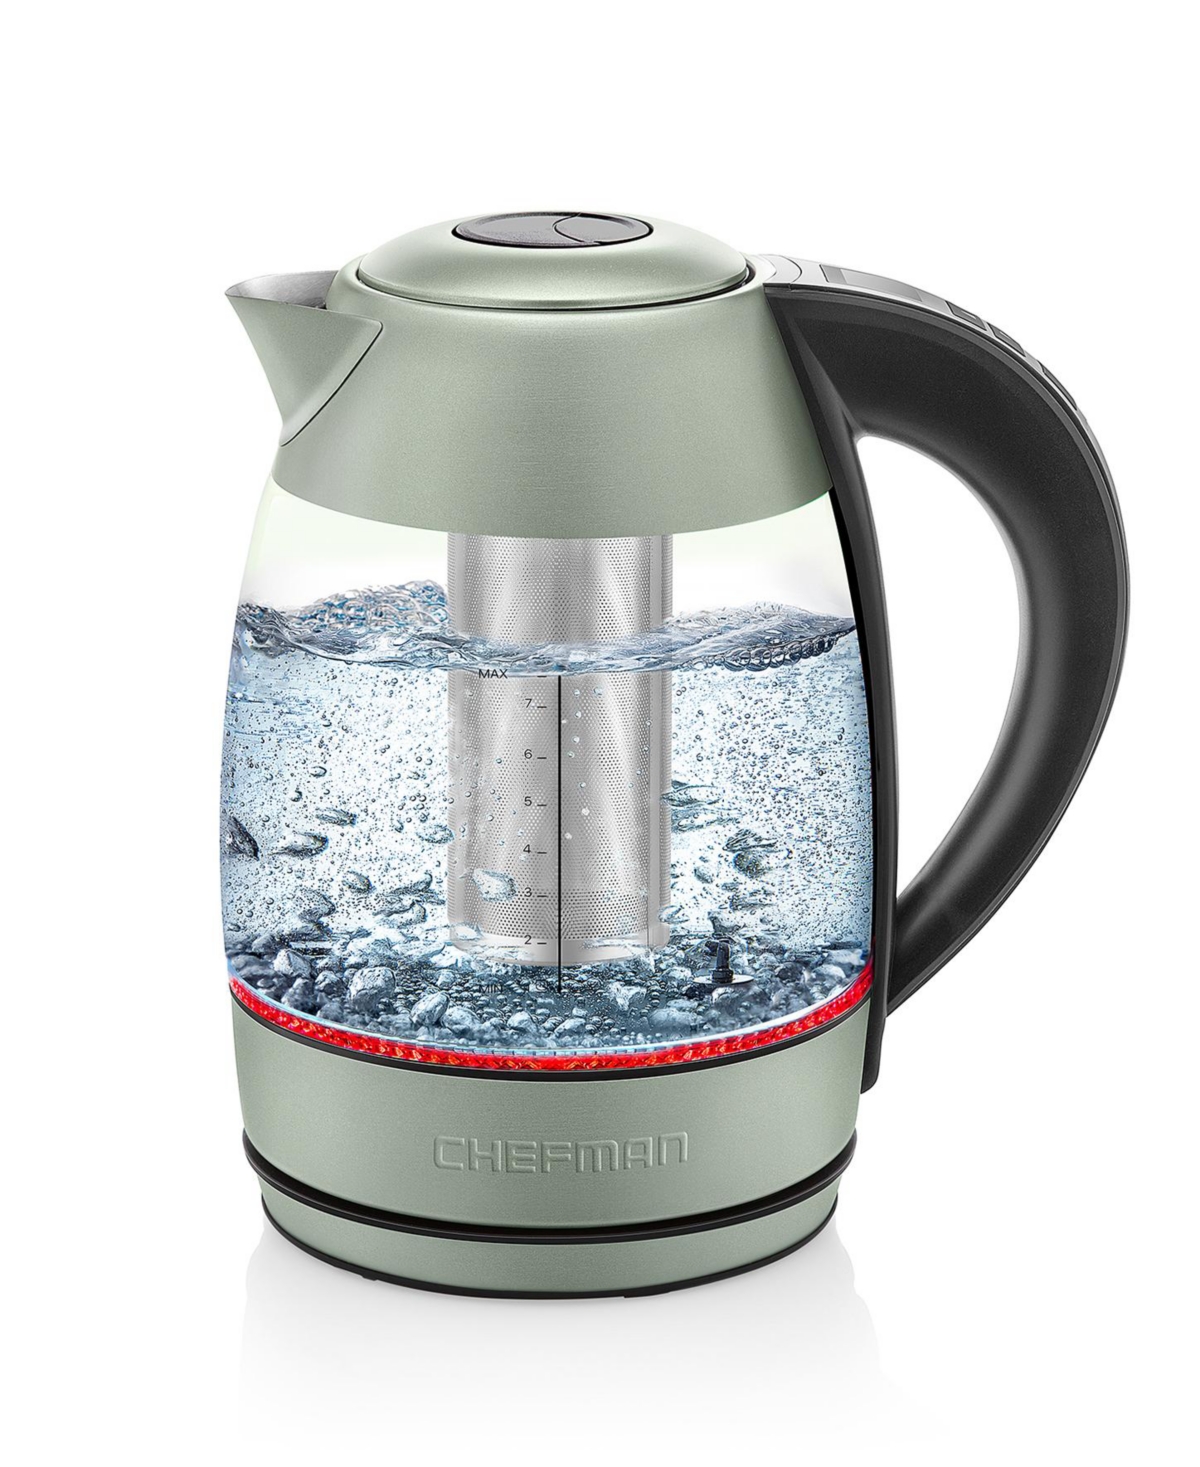 Chefman 1.7 Liter Glass Precision Control Electric Kettle In Green